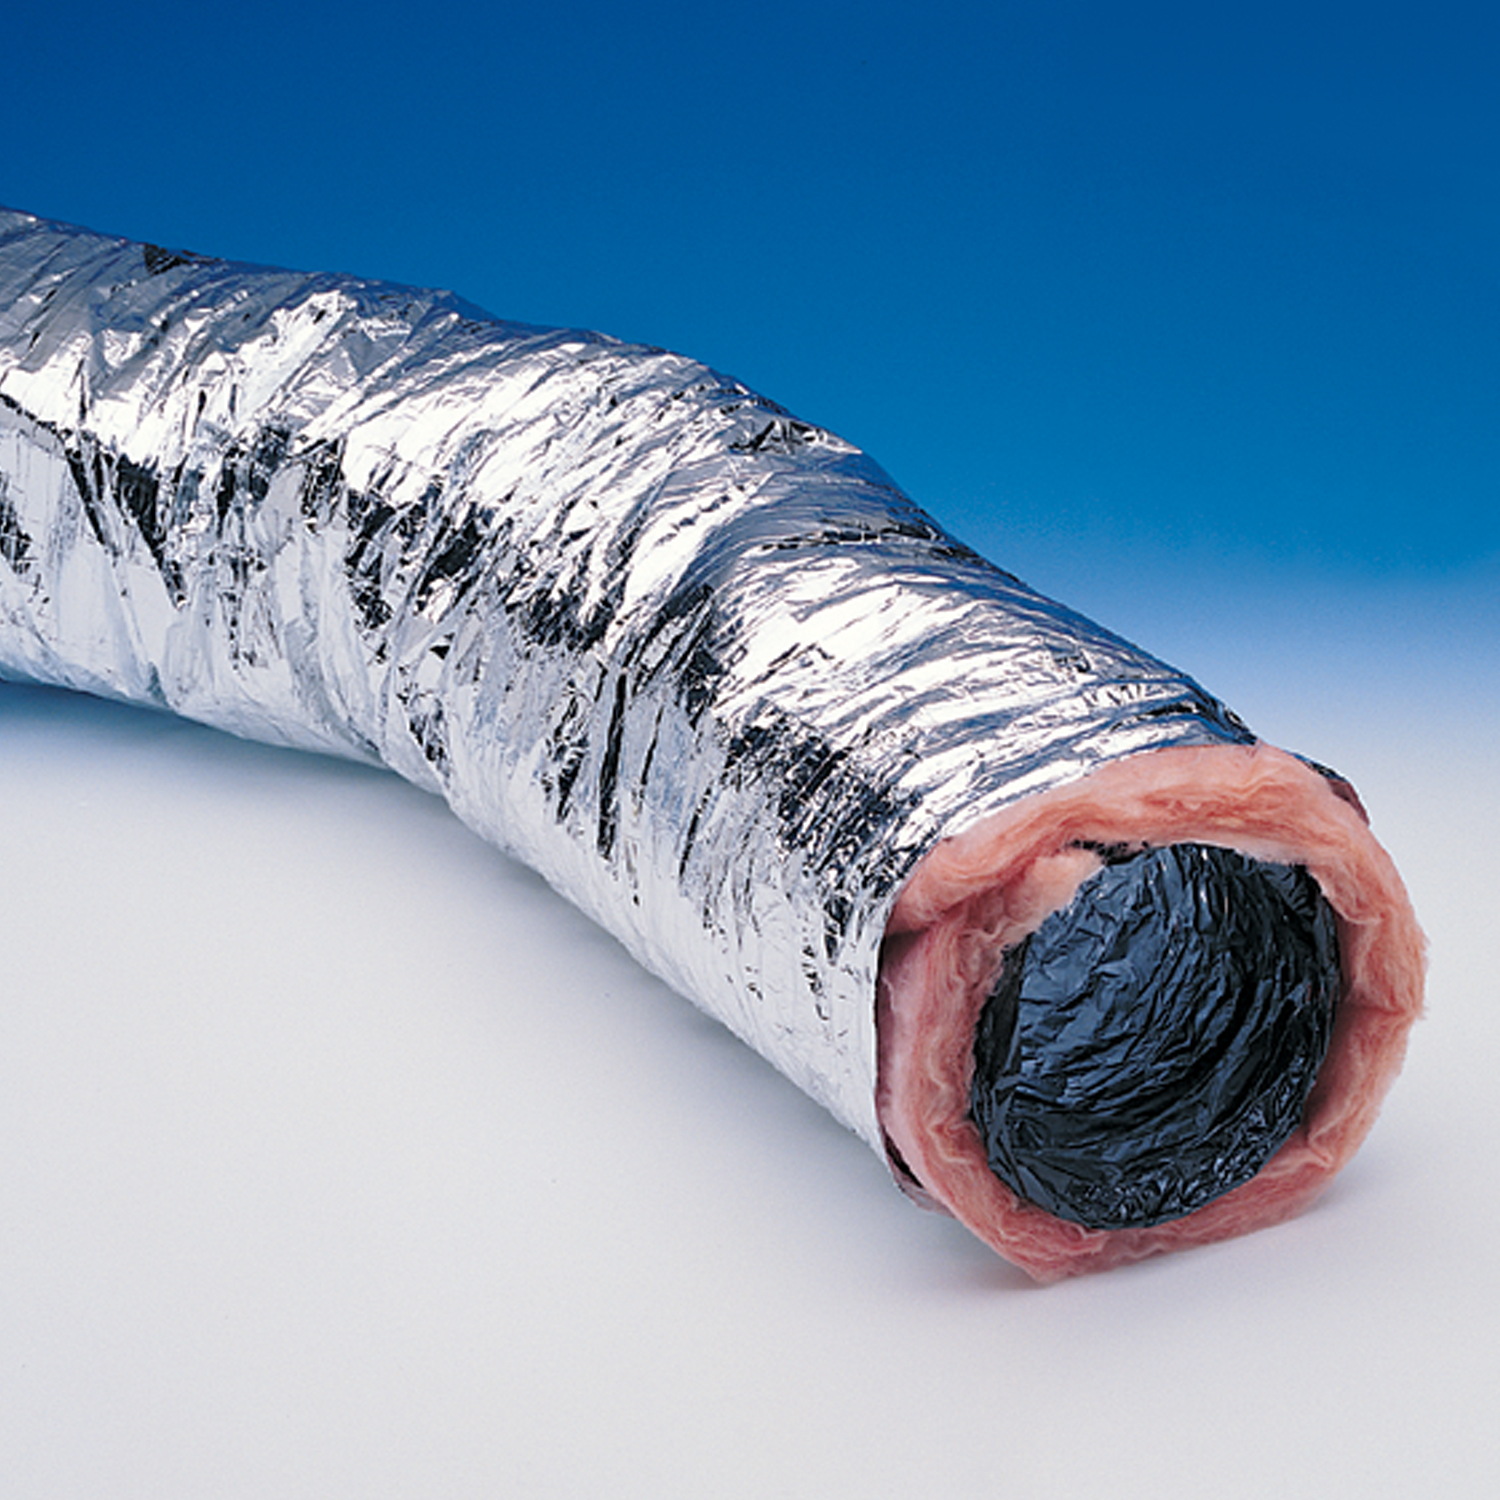 6" Insulated Flexible Duct | Packard Online